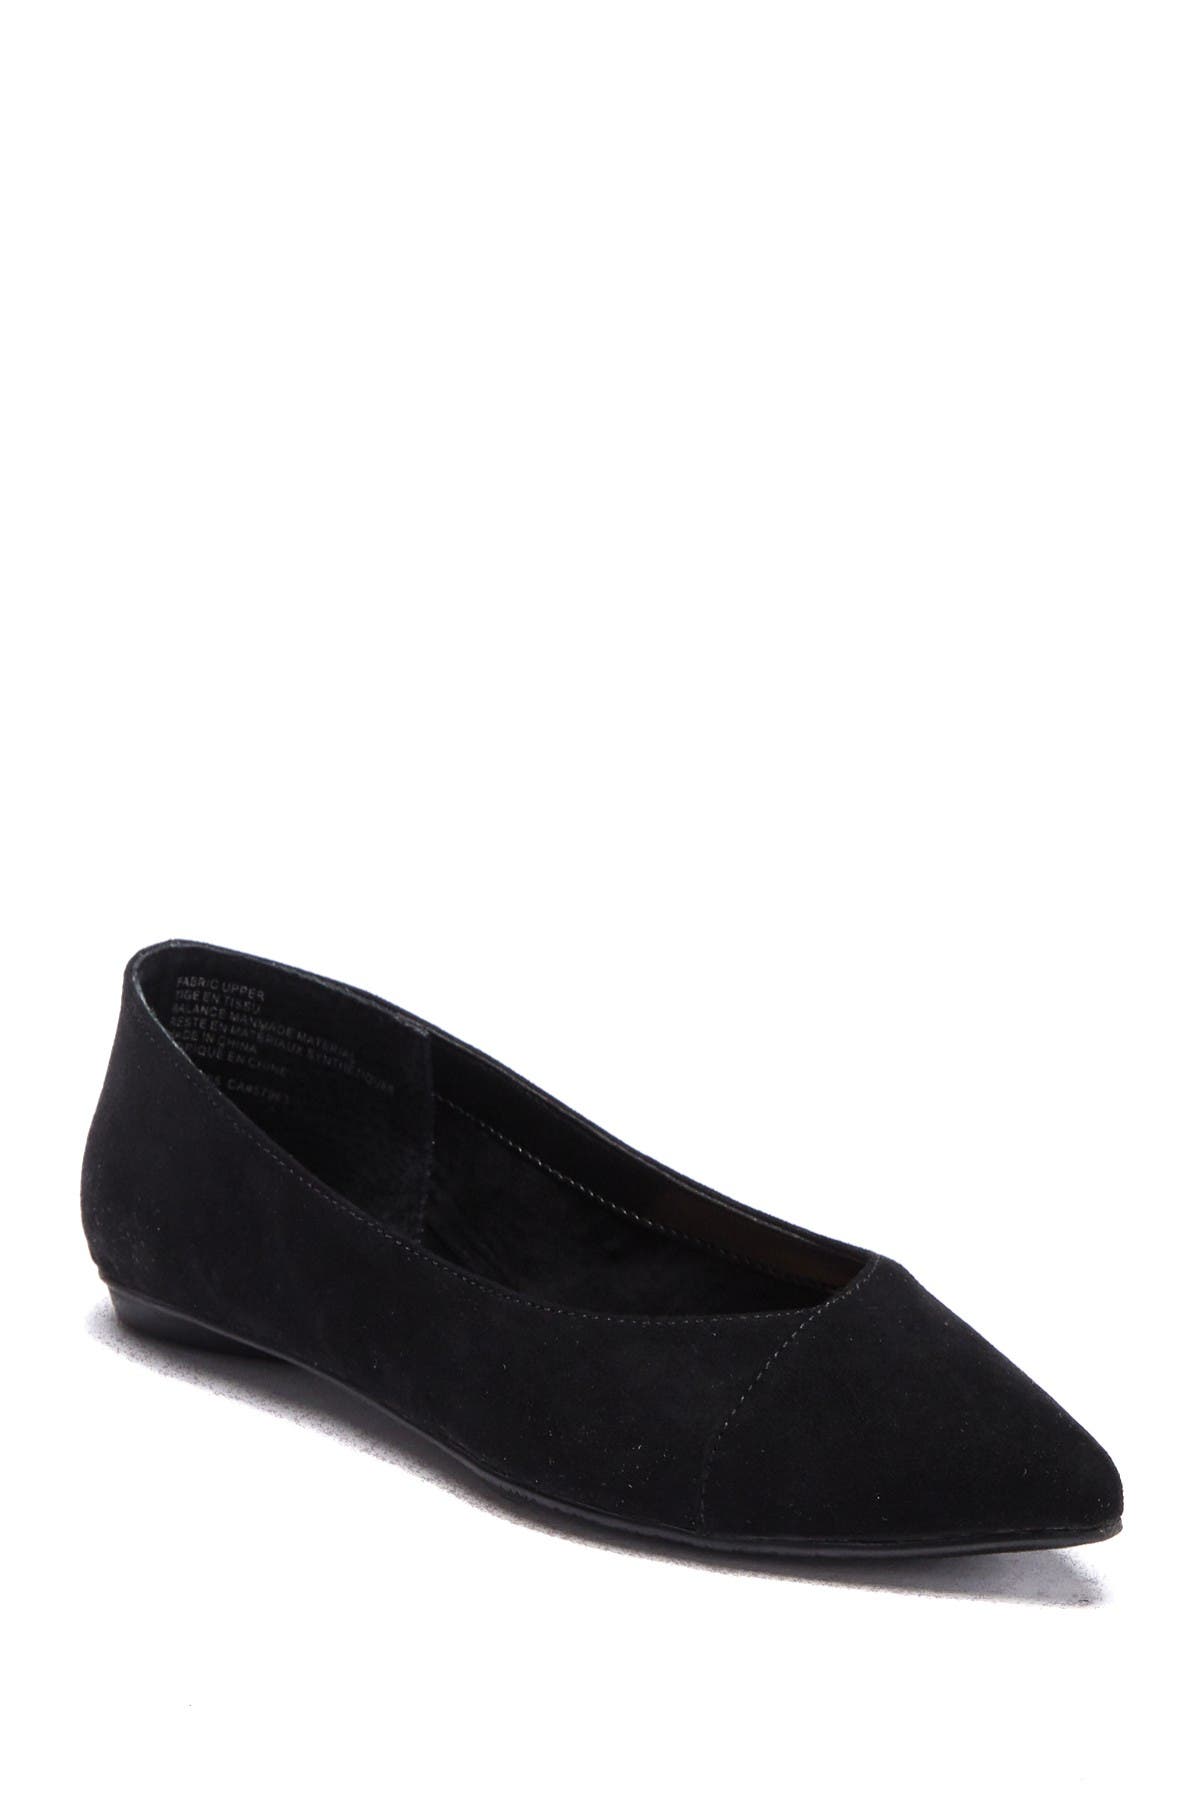 Abound | Sydnee Pointed Toe Flat 